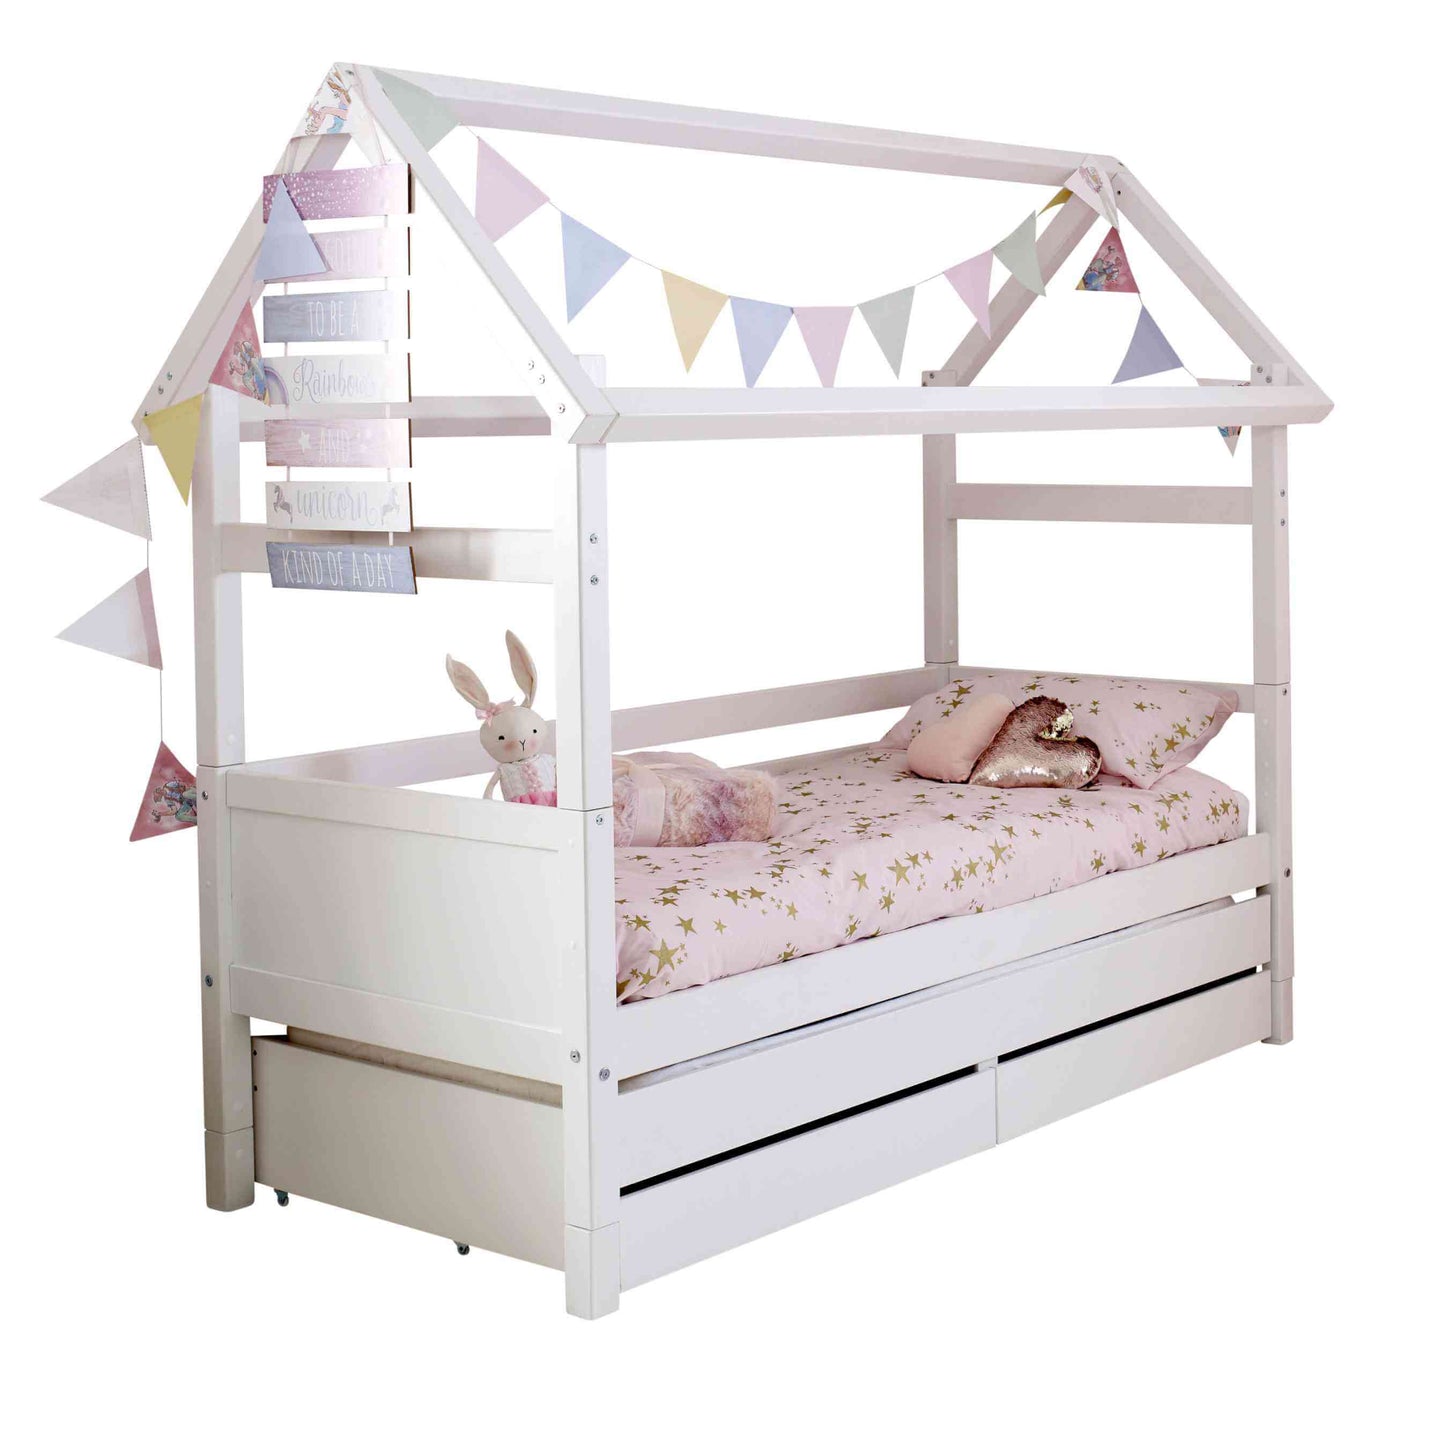 Laila Nordic Playhouse with Optional Trundle & Storage Drawers Cut Out With Trundle